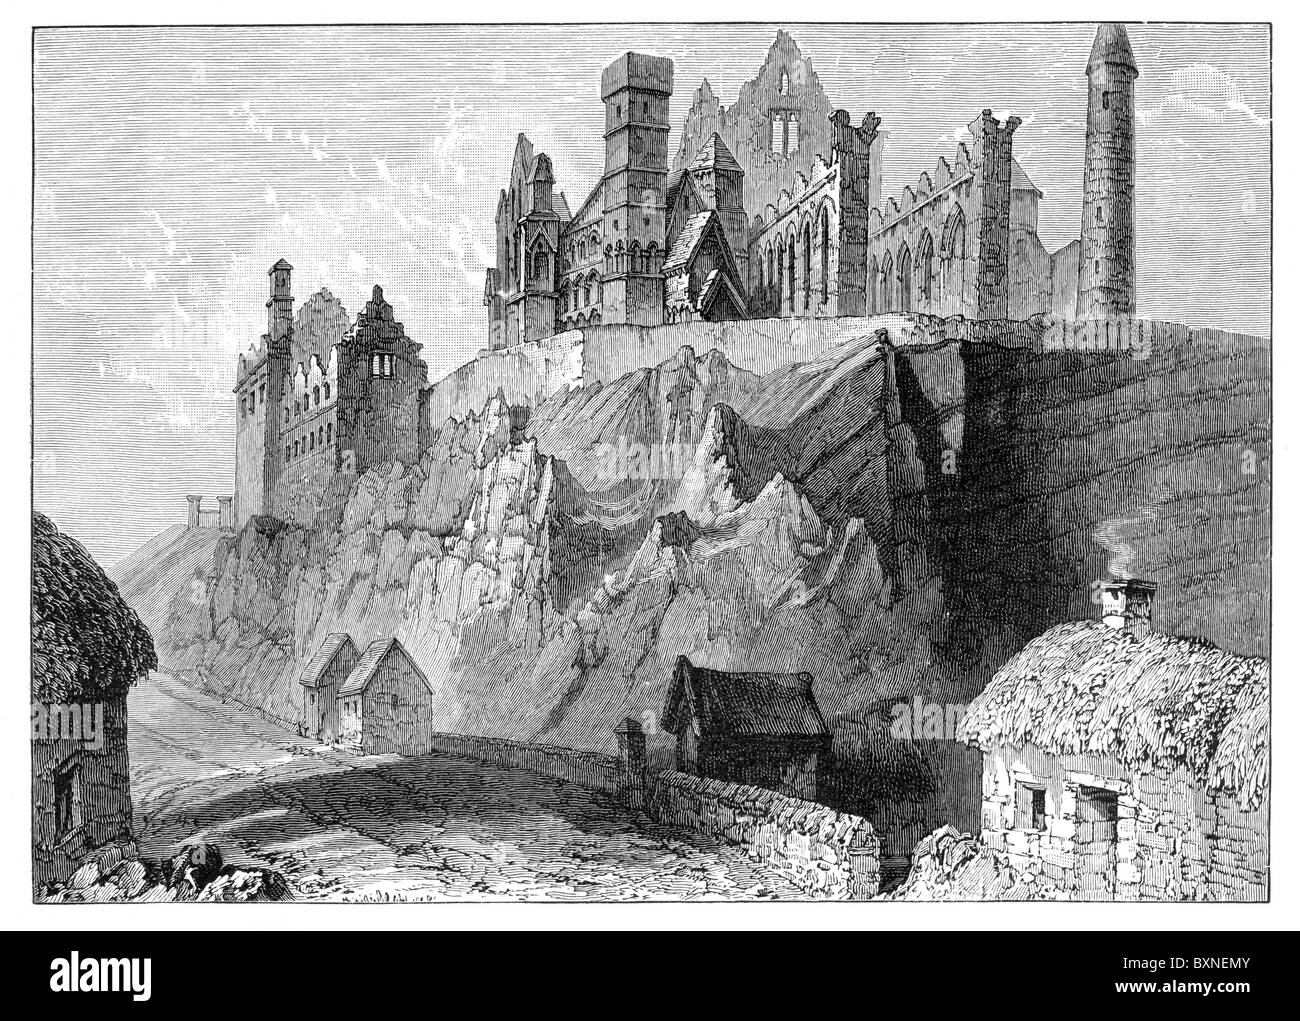 The Rock of Cashel, County Tipperary, Ireland after an engraving by William Henry Bartlett; 19th century; Stock Photo